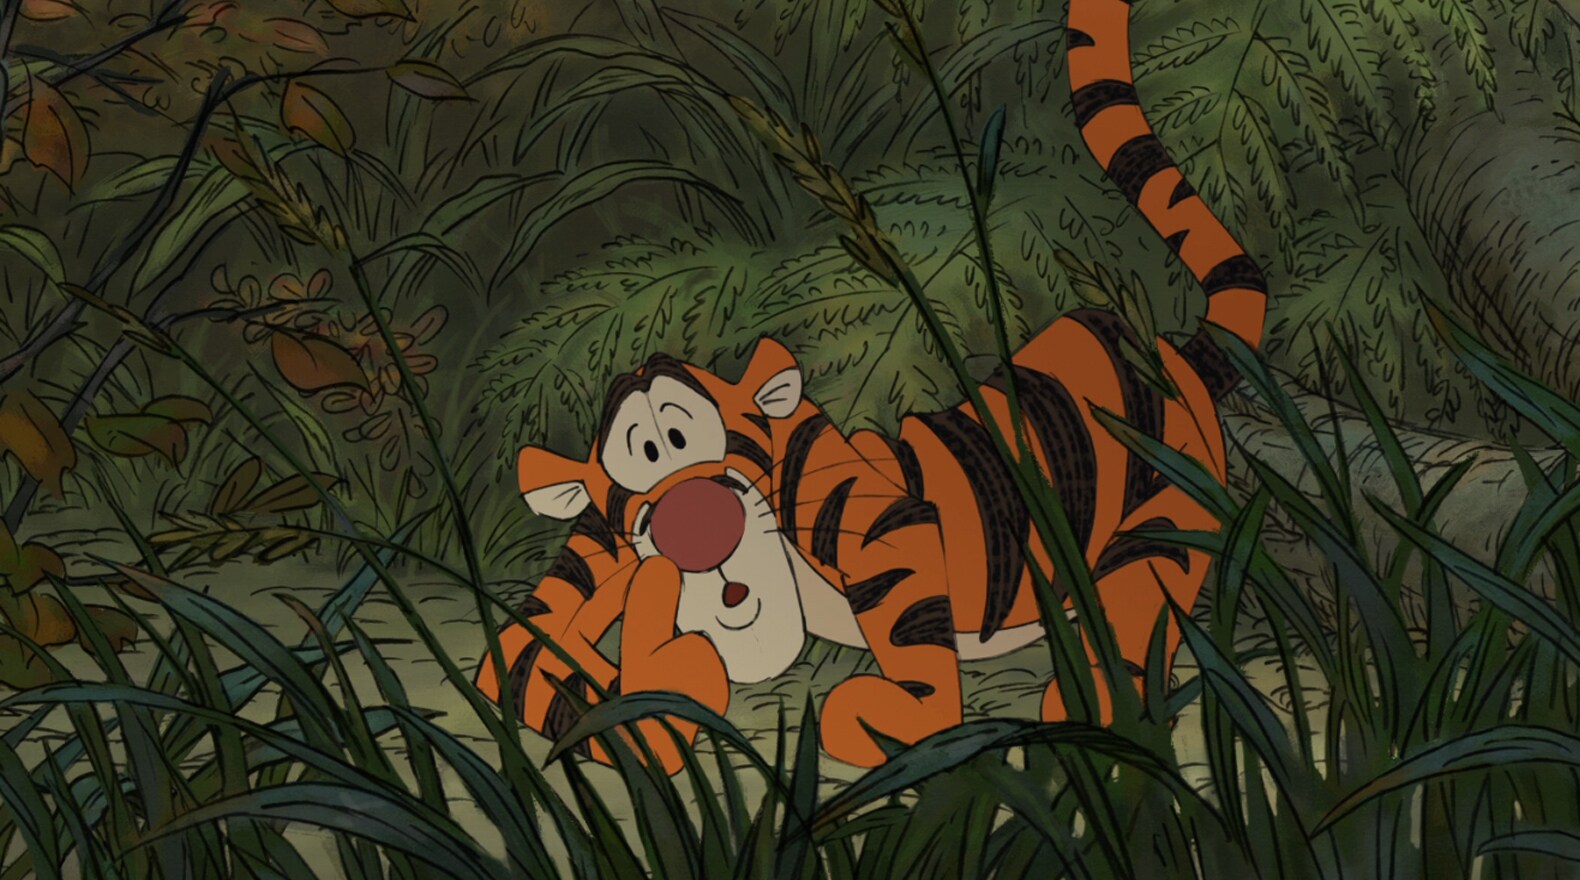 Shhh. Tigger is busy tracking the Backson.